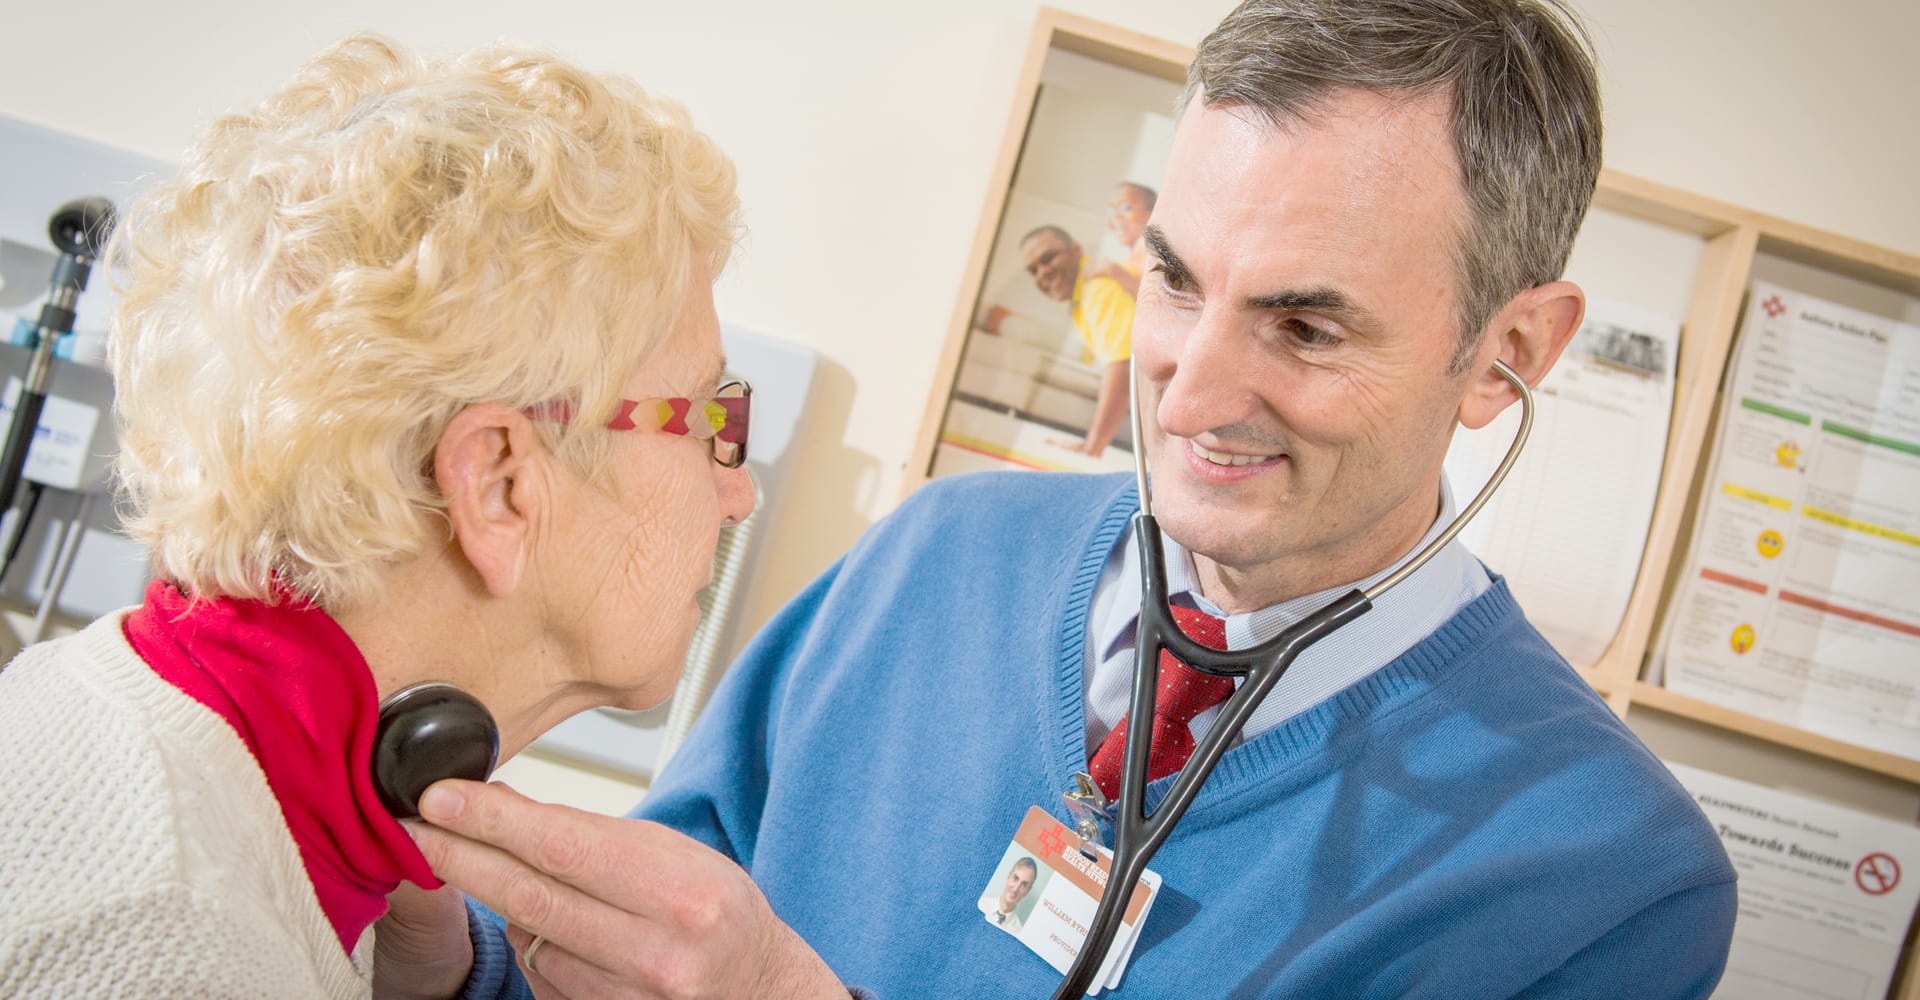 A health care provider listening to a patient’s heart rate with a stethoscope